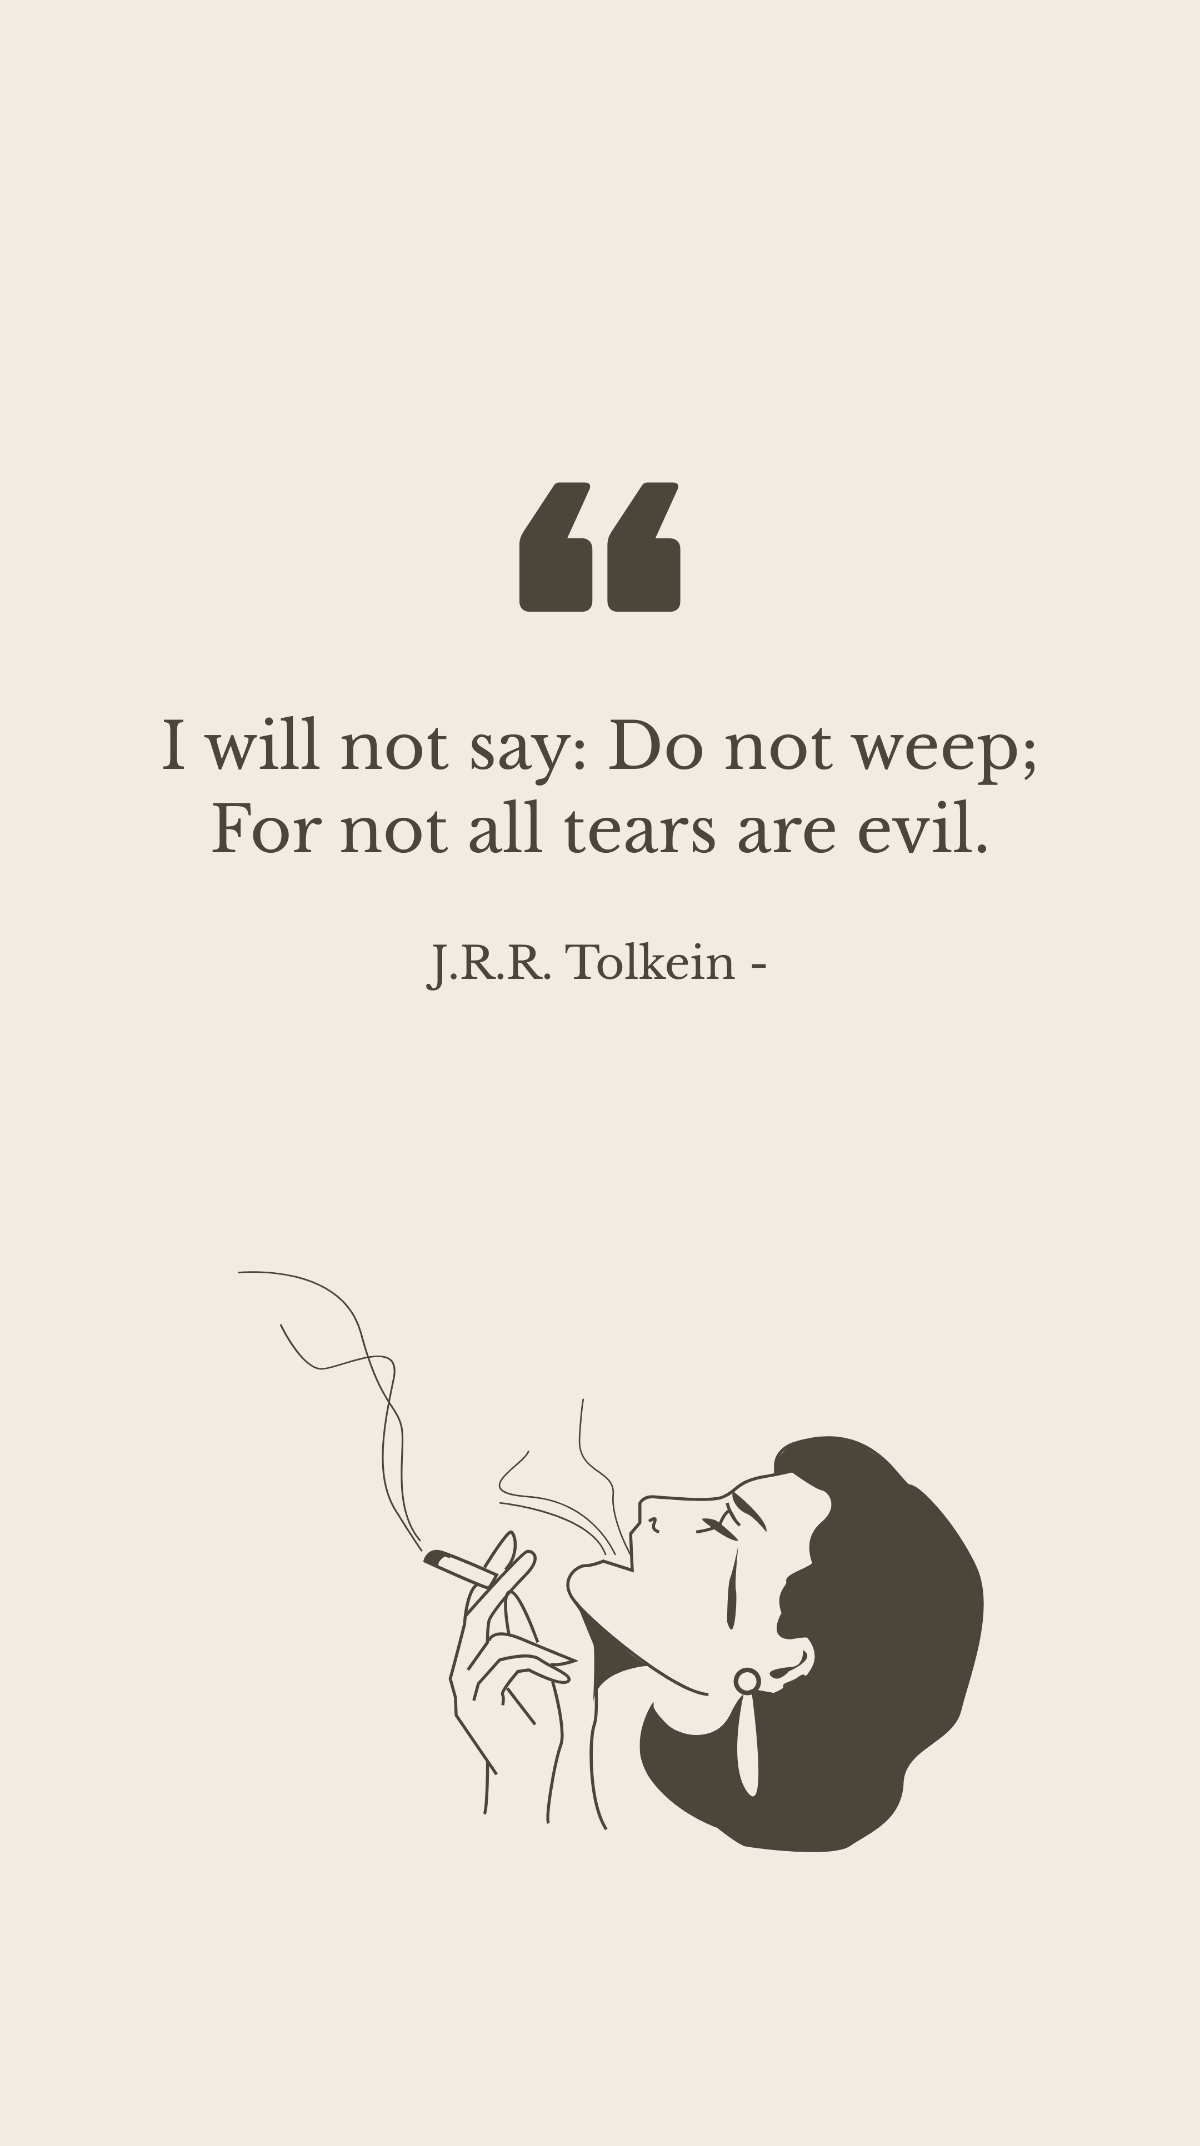 Free J.R.R. Tolkein - I will not say: Do not weep; For not all tears are evil. Template